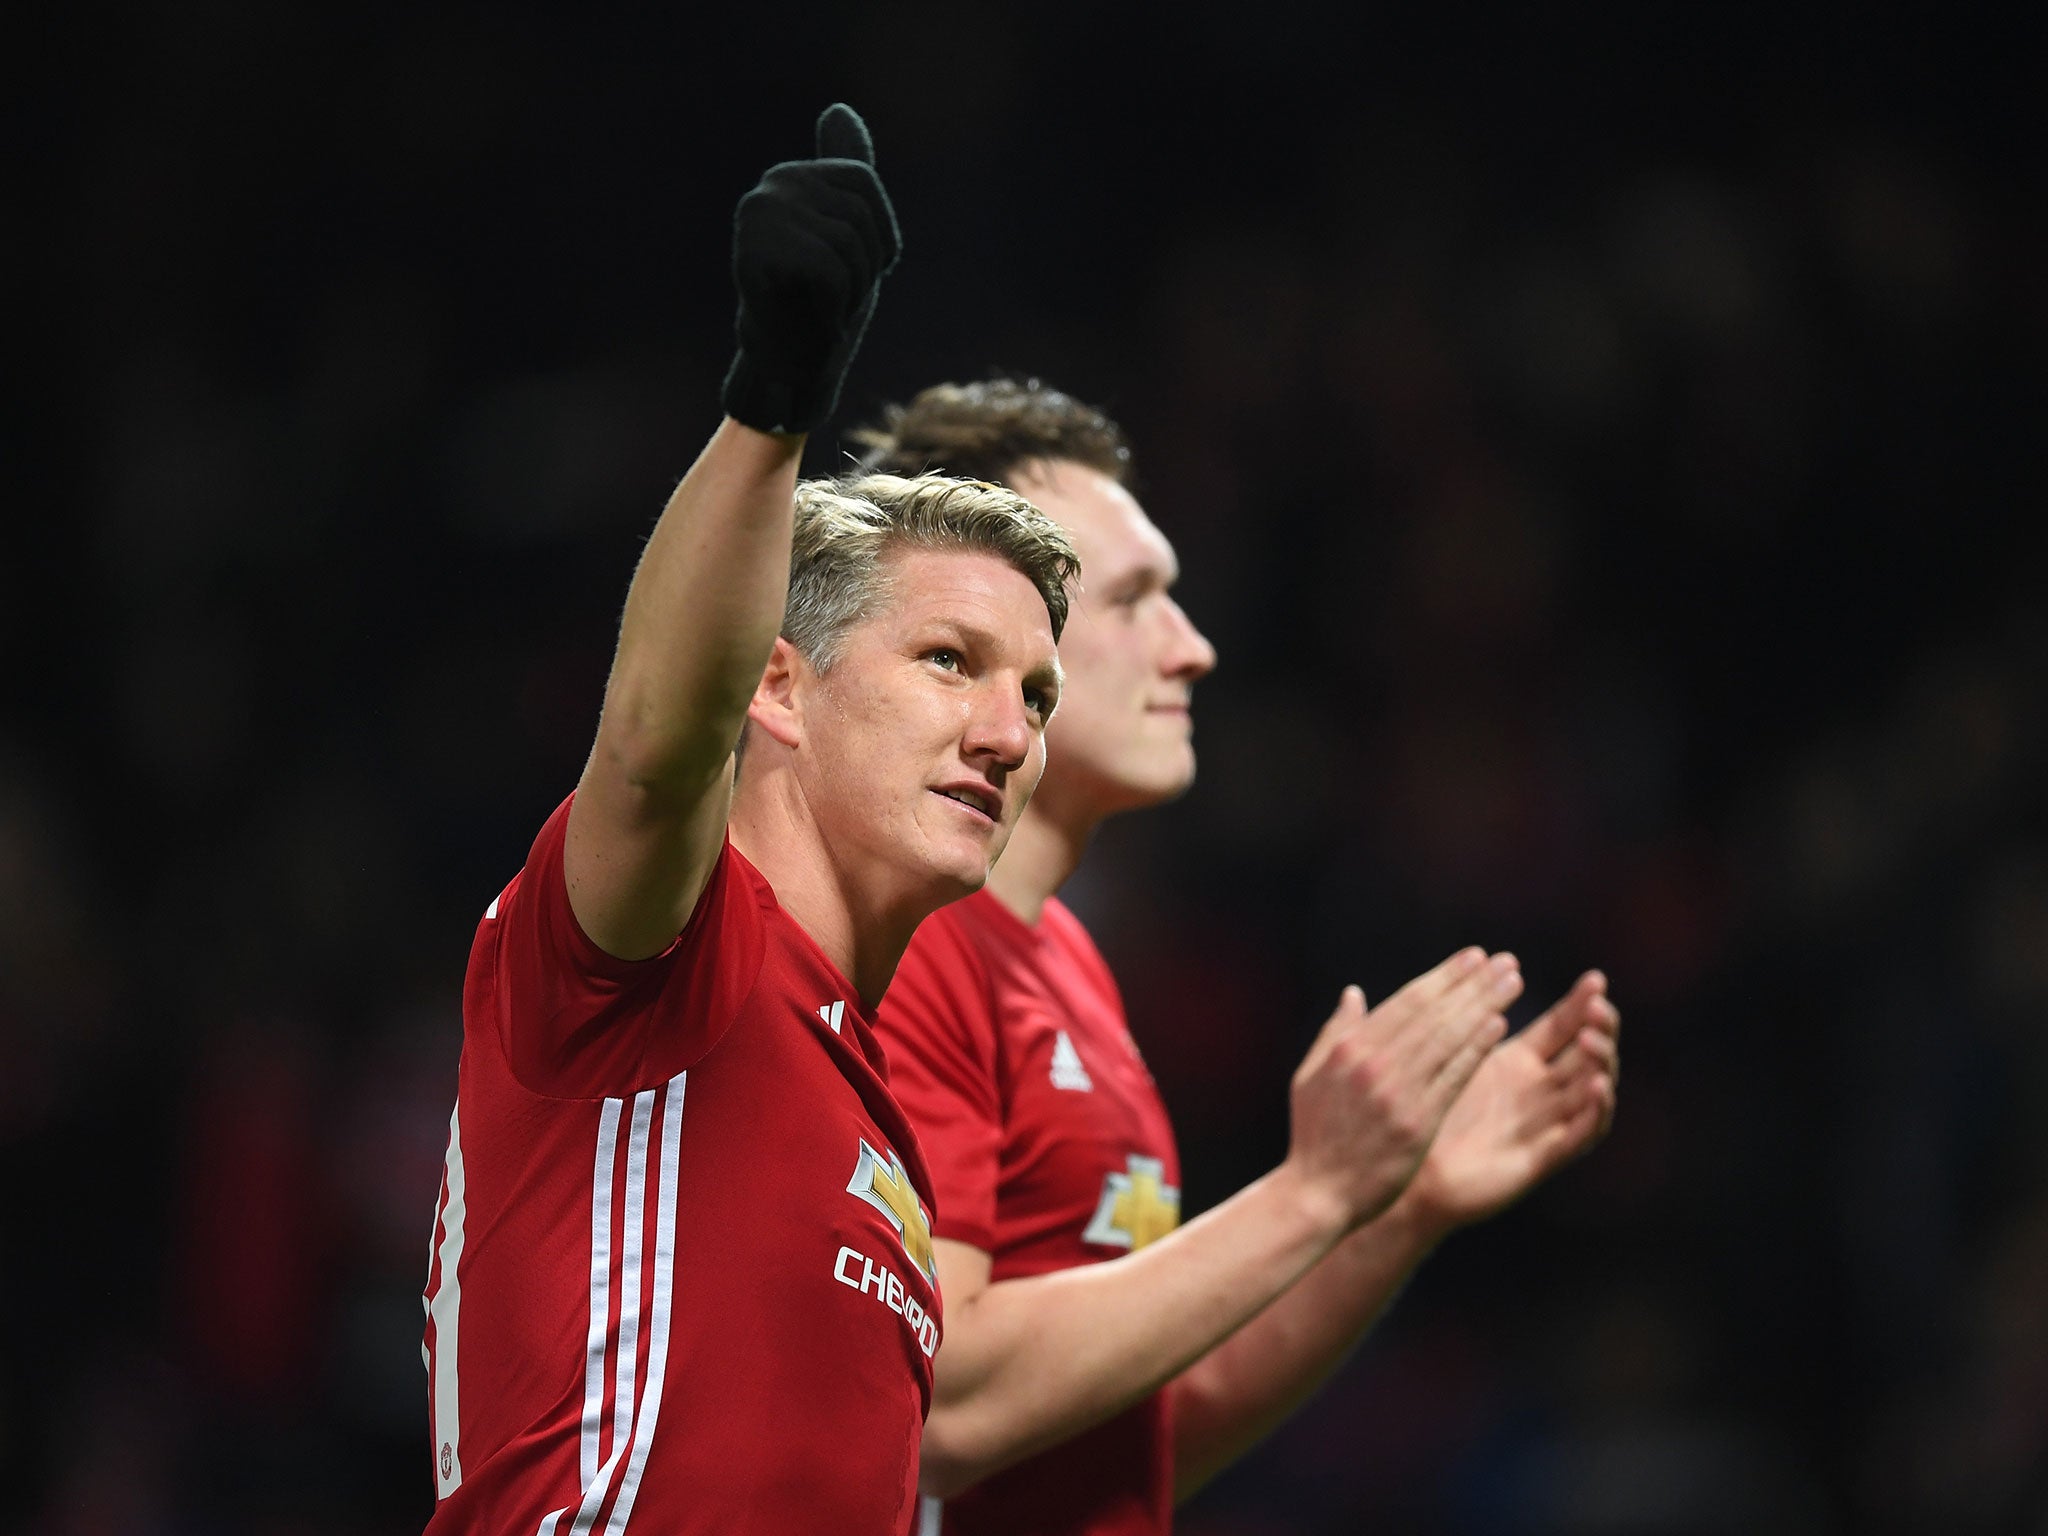 Michael Carrick hailed Bastian Schweinsteiger after he made his long-awaited return to the Manchester United squad